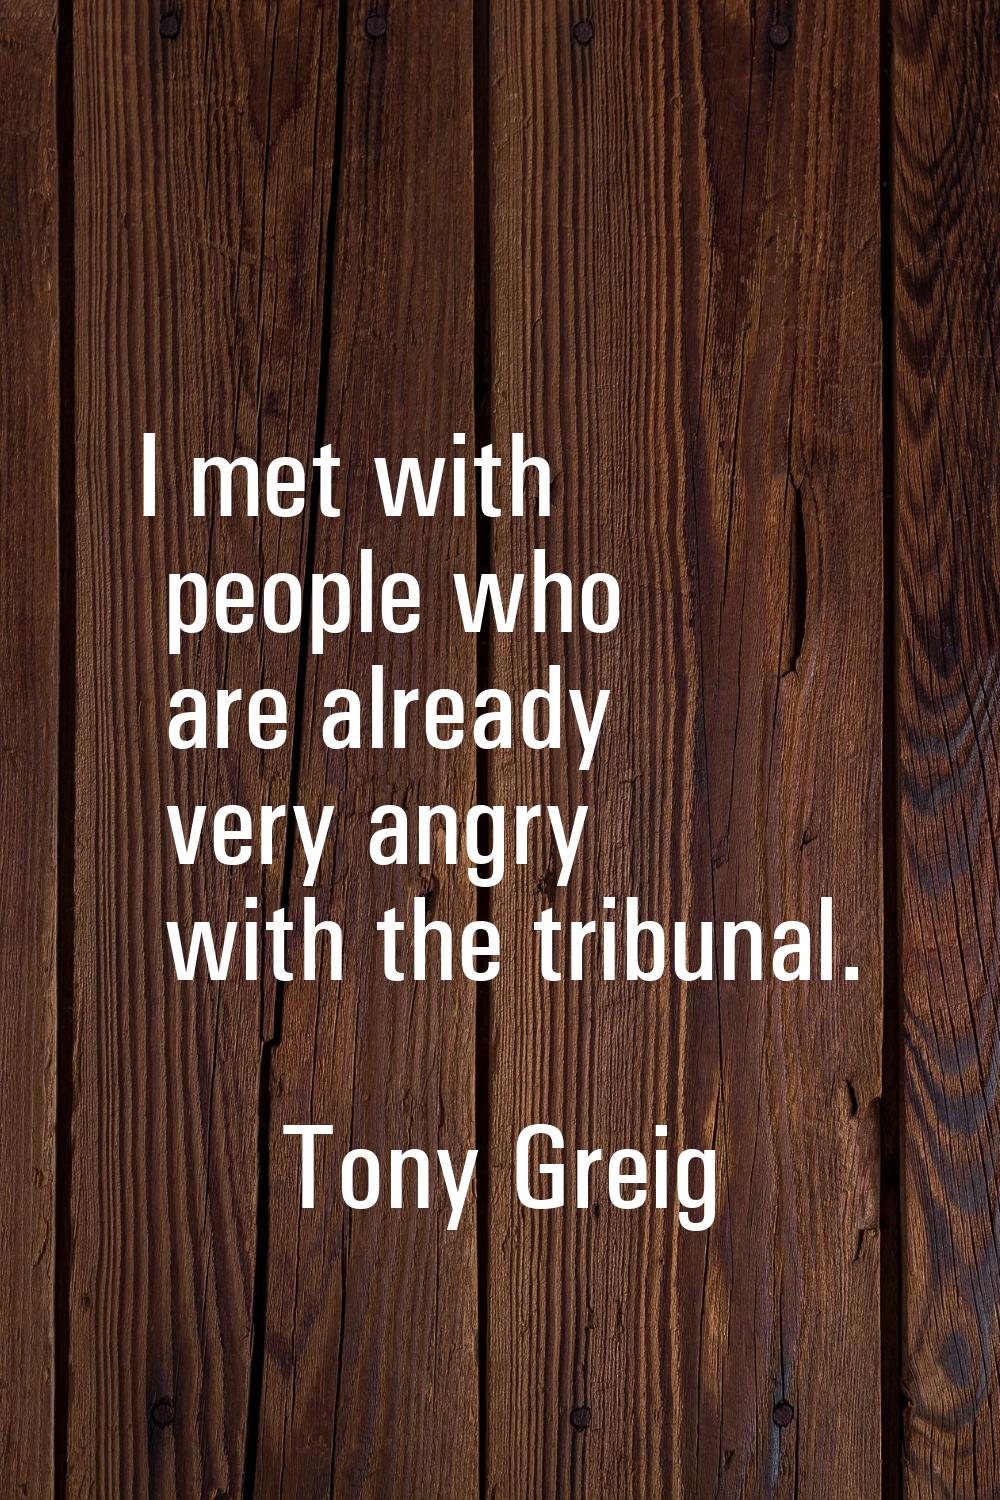 I met with people who are already very angry with the tribunal.